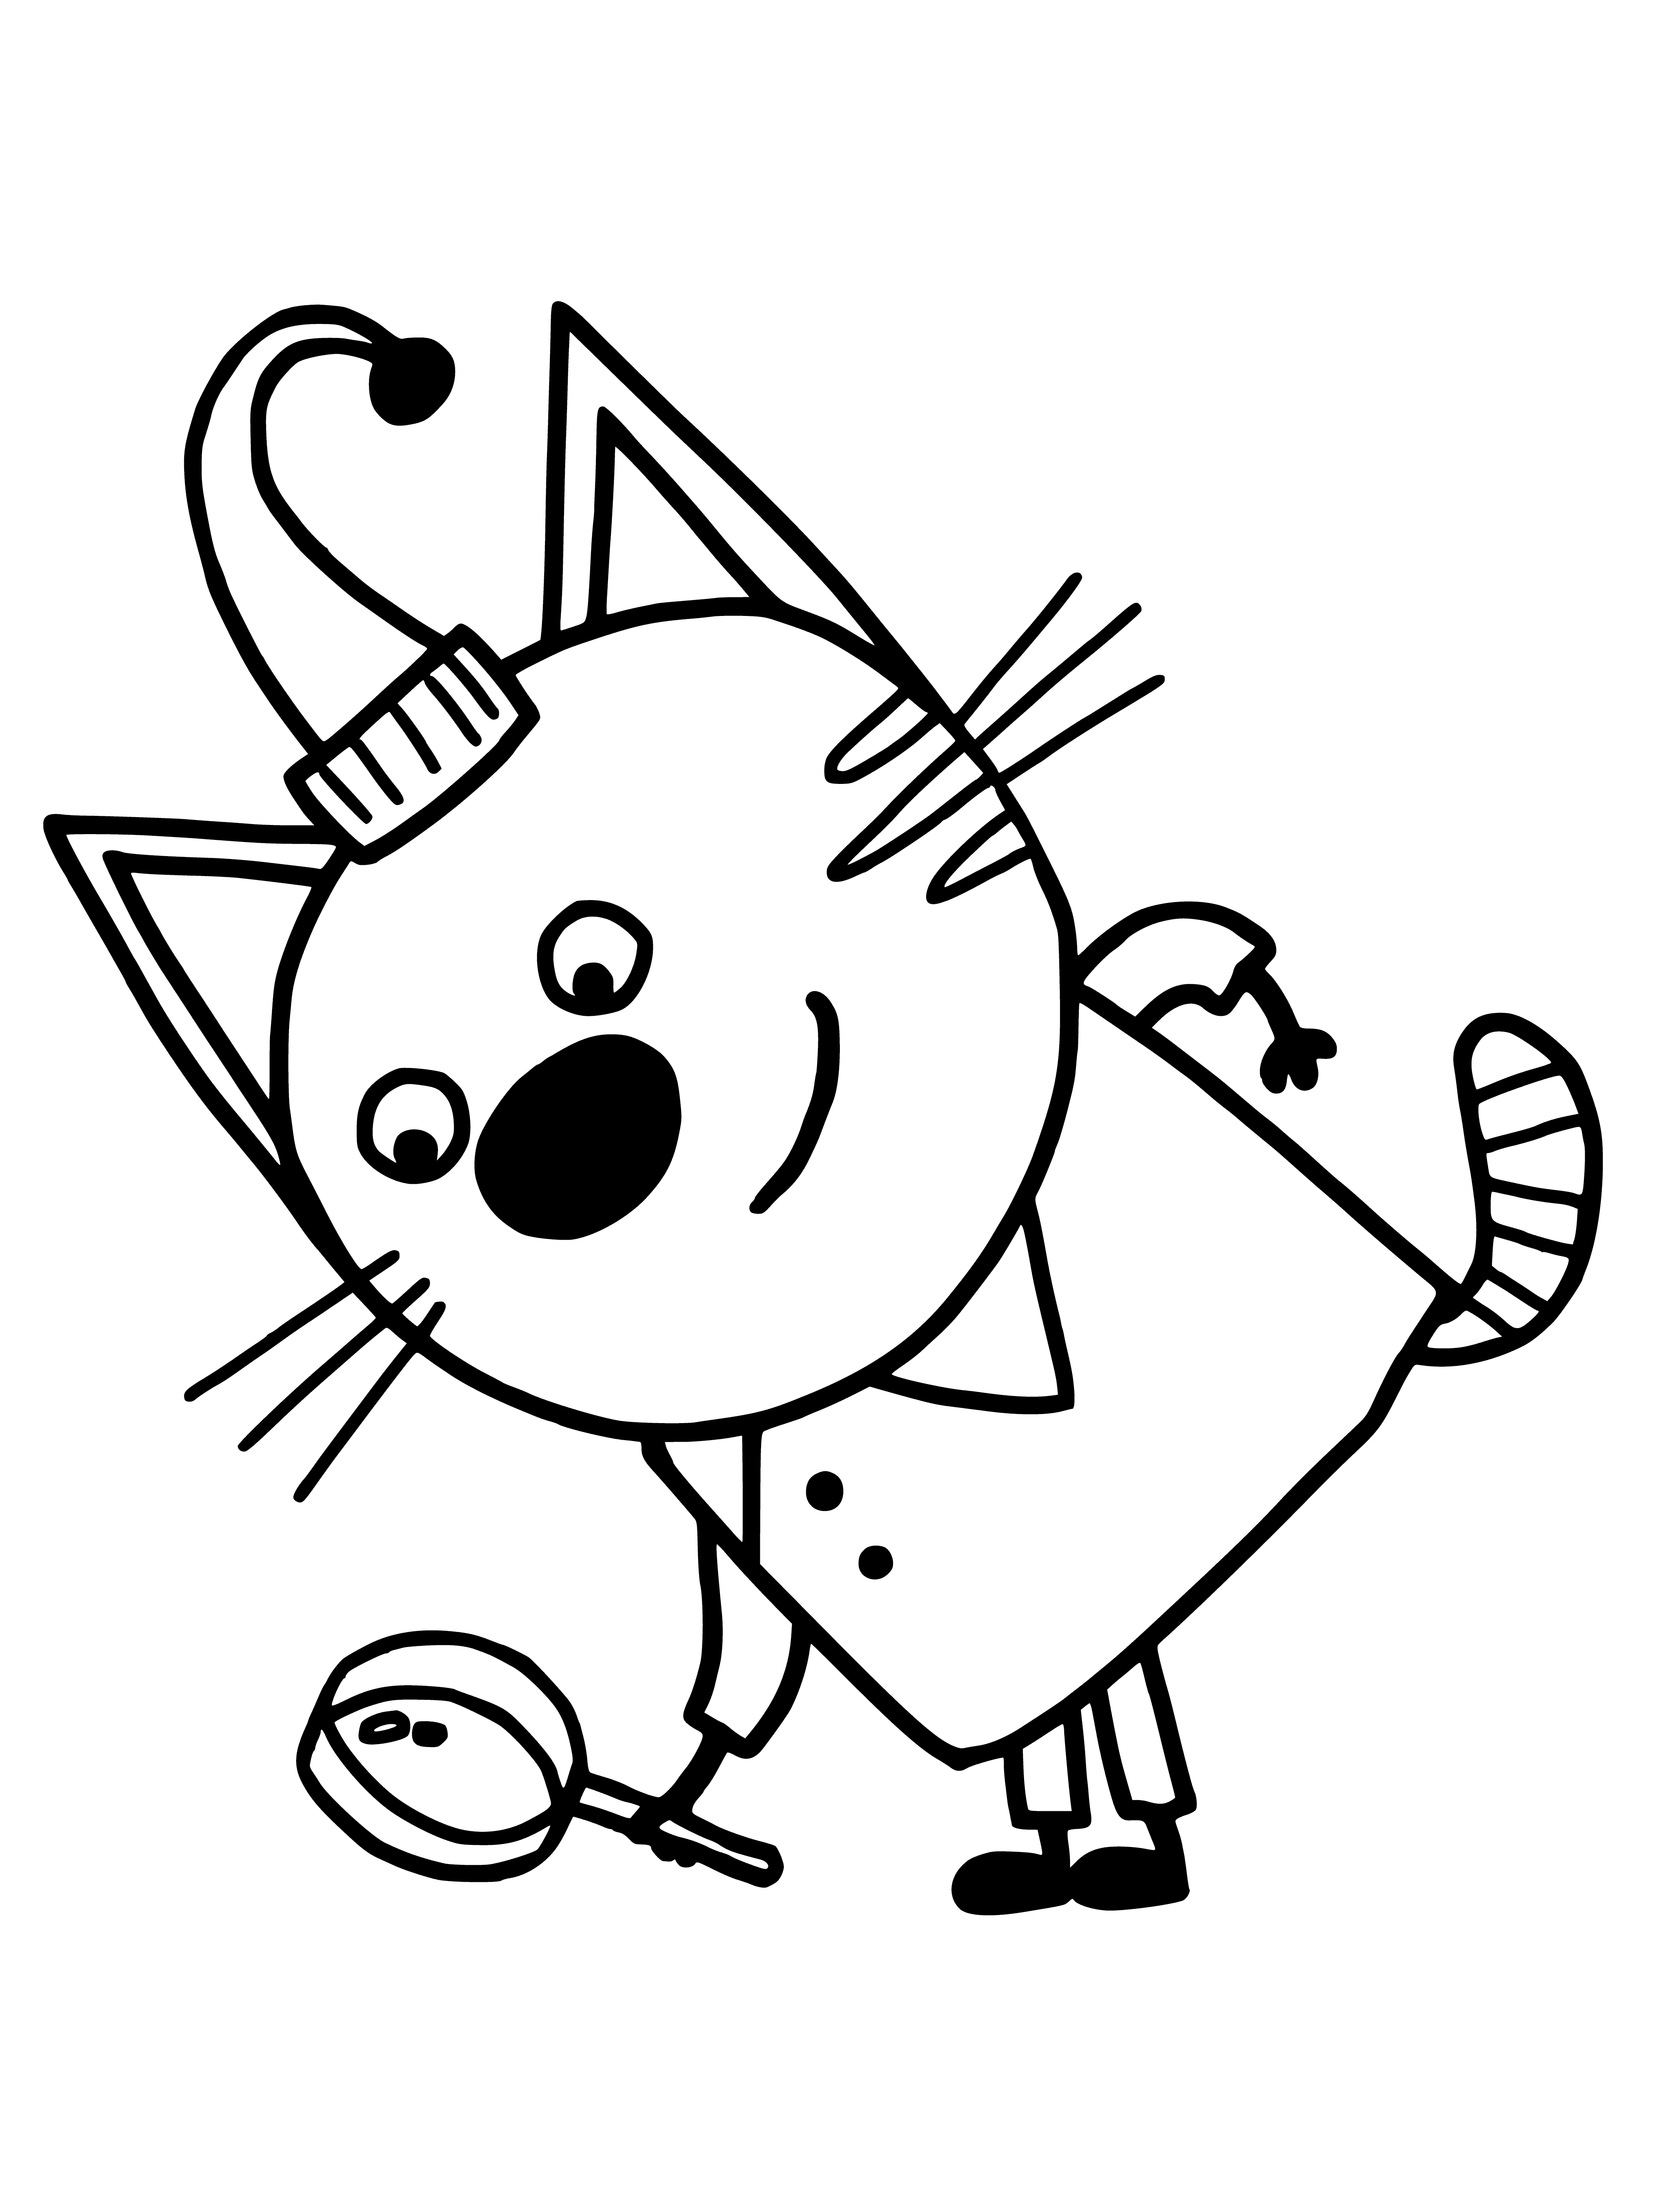 coloring page: Cat in blue bowl, yellow liquid in green container, white liquid in blue container on plates of varying colors.